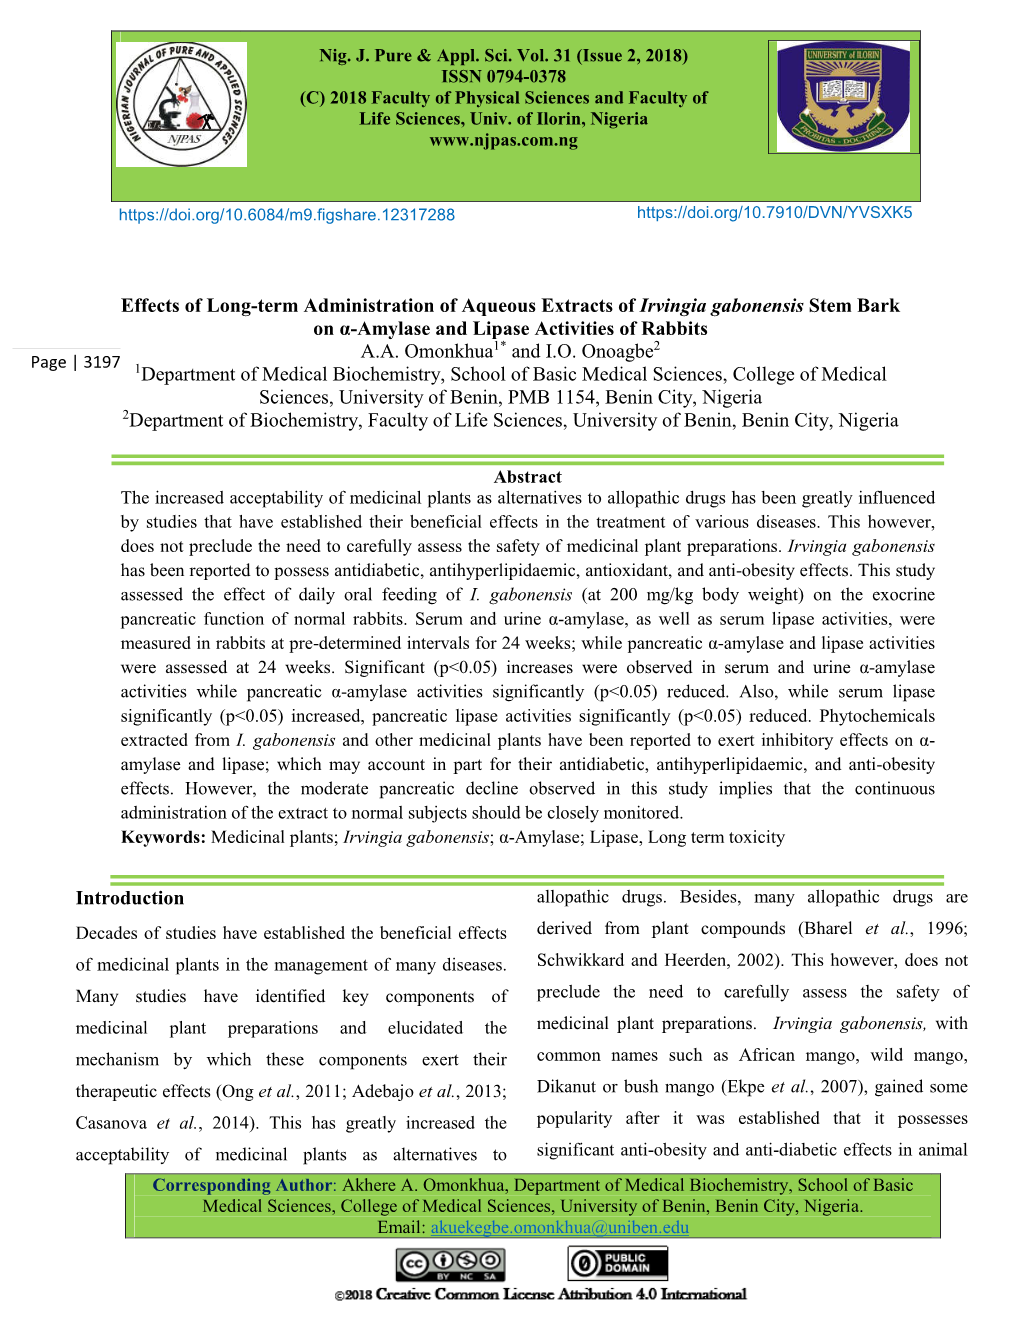 Effects of Long-Term Administration of Aqueous Extracts of Irvingia Gabonensis Stem Bark on Α-Amylase and Lipase Activities of Rabbits A.A